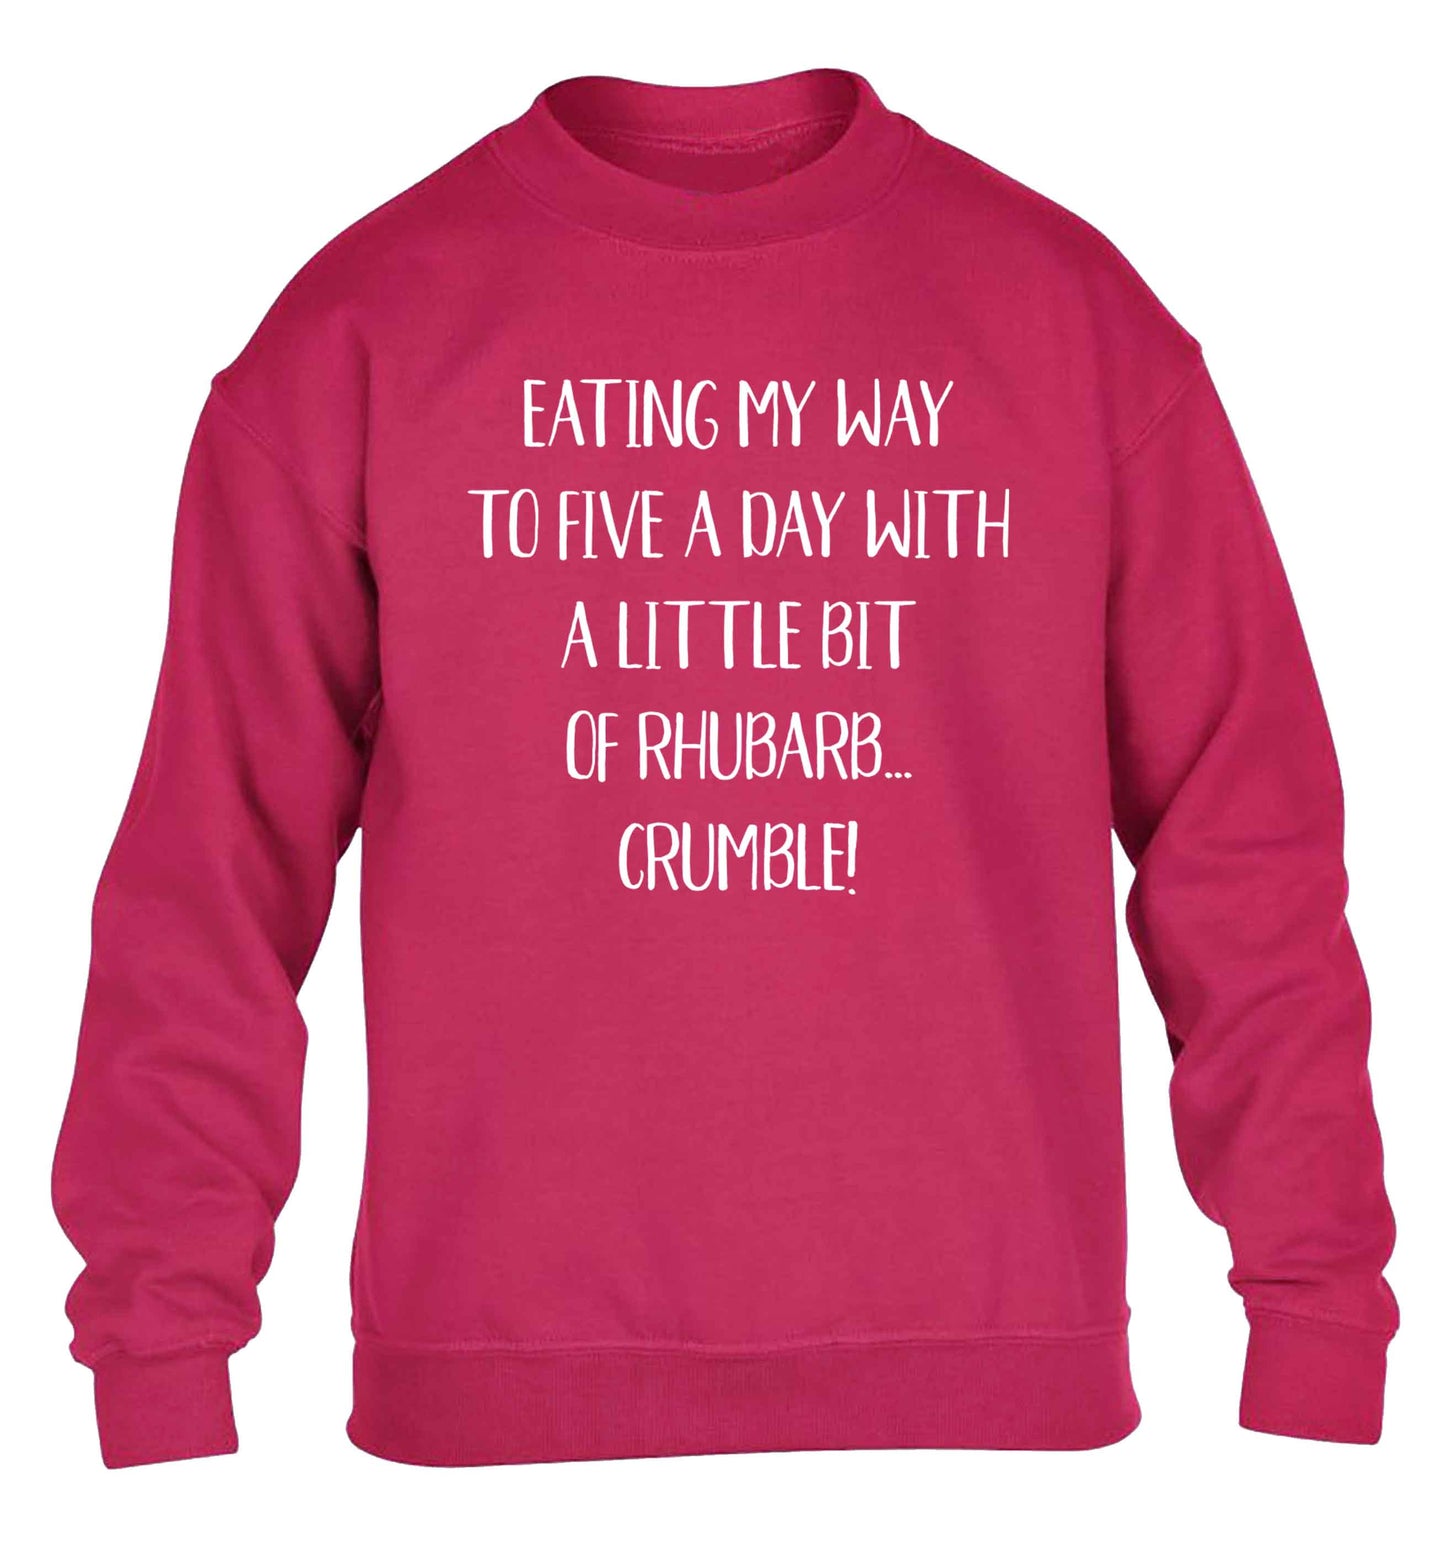 Eating my way to five a day with a little bit of rhubarb crumble children's pink sweater 12-13 Years